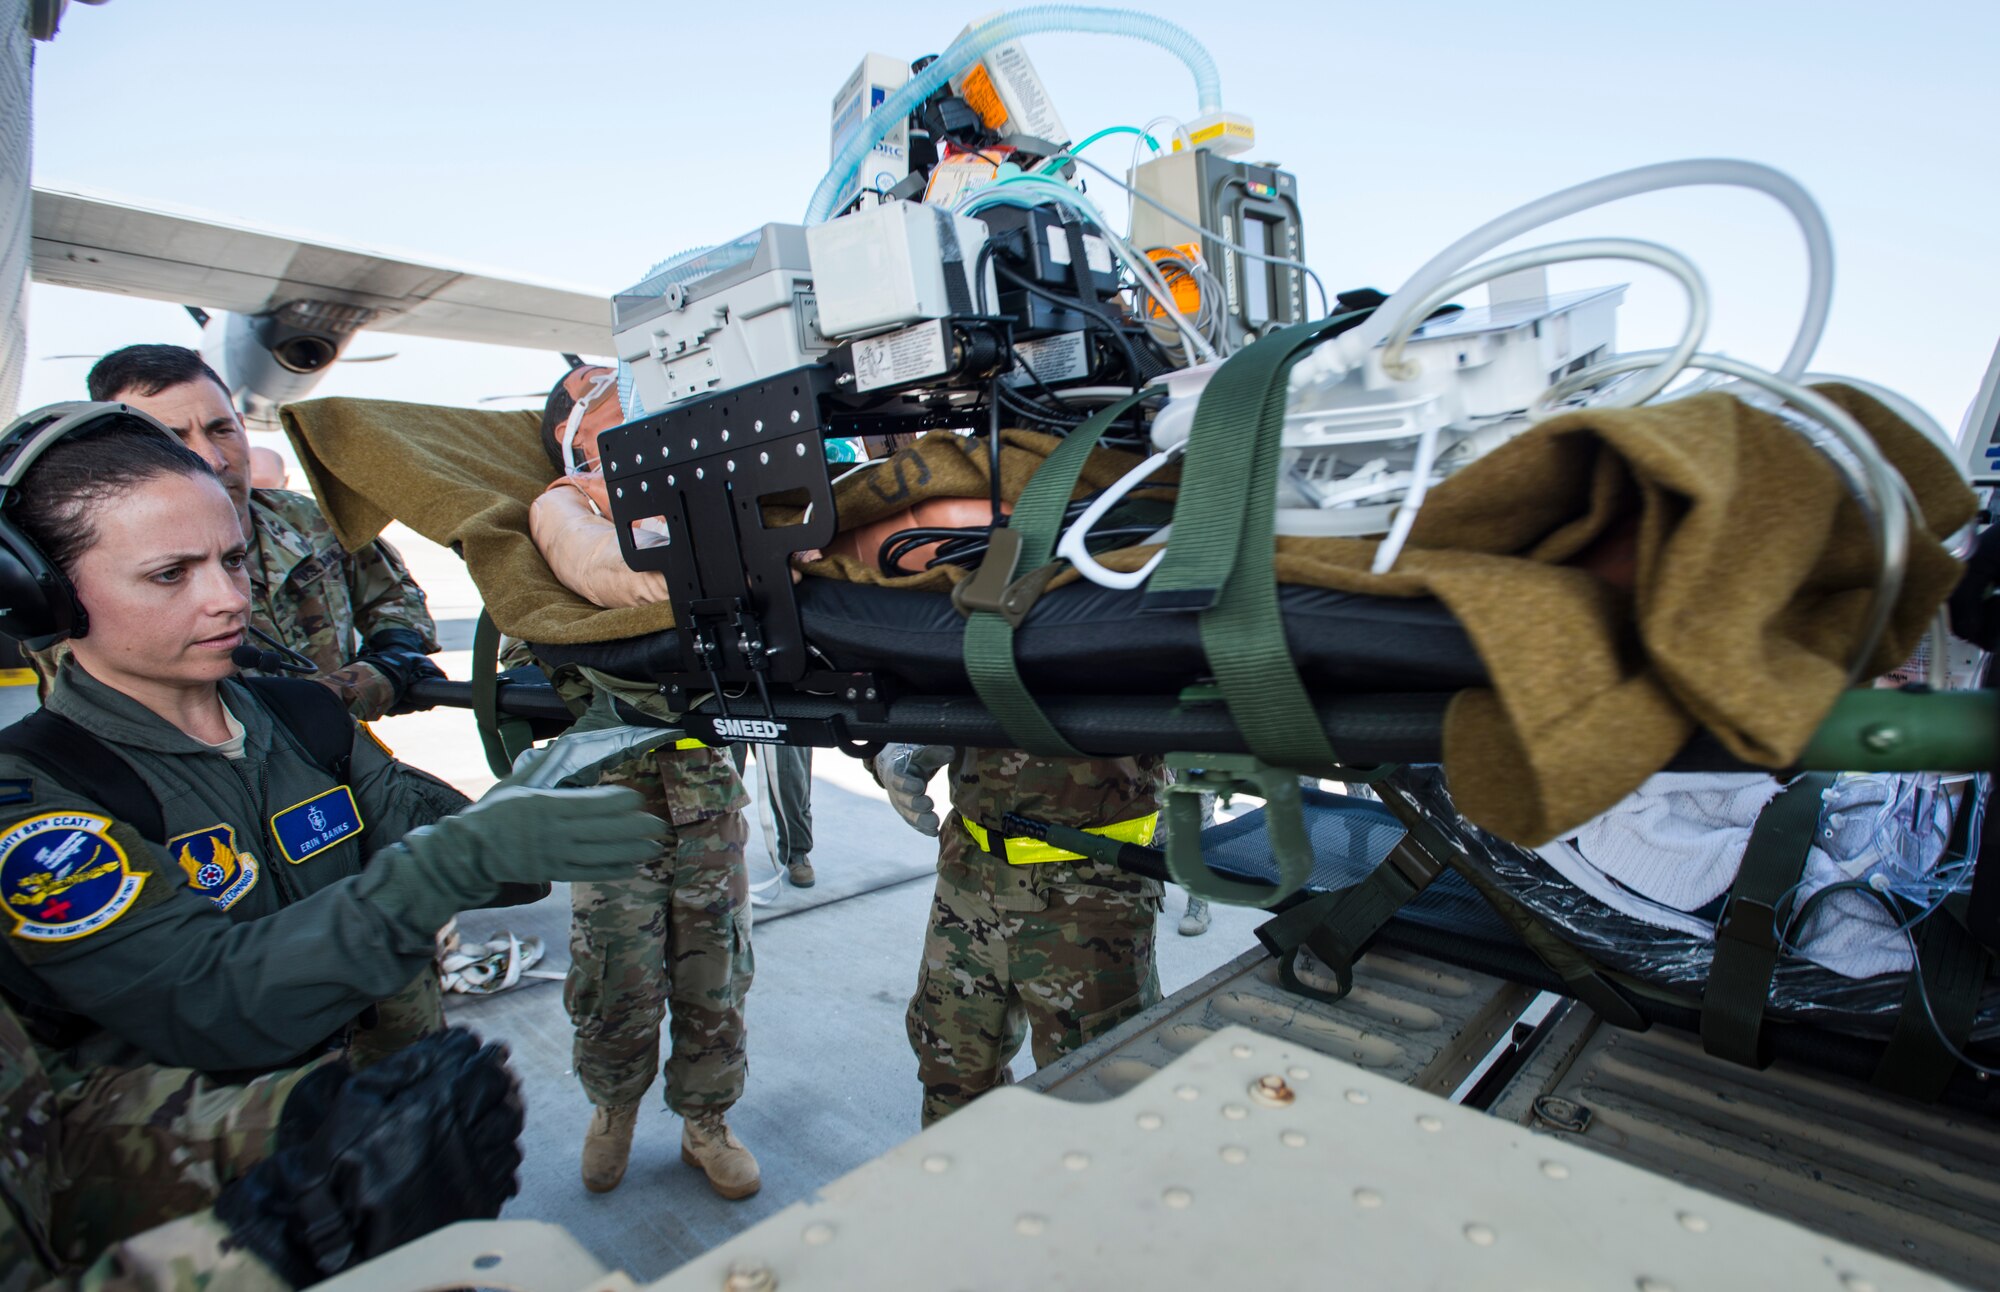 U.S. Air Force Capt. Erin Banks, 88th Medical Group flight nurse, helps lift a simulated patient onto a Humvee during Exercise Ultimate Caduceus 2018 at Travis Air Force Base, California, Aug. 23, 2018. Ultimate Caduceus 2018 is an annual patient movement exercise designed to test the ability of U.S. Transportation Command to provide medical evacuation. (U.S. Air Force photo by Staff Sgt. Daniel Phelps)